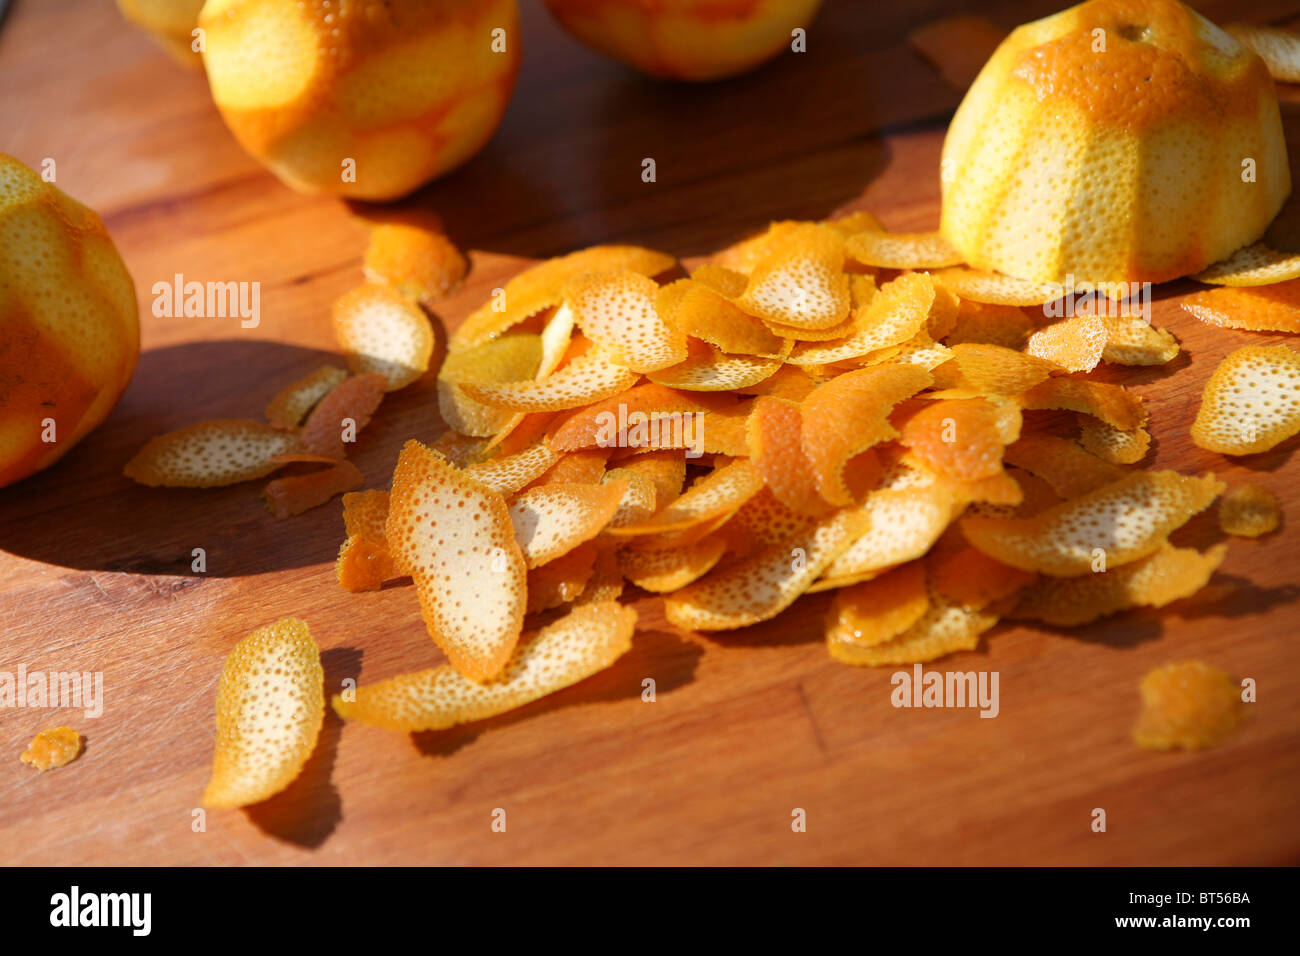 Pile of orange peel on a wooden chopping board, outside. Stock Photo